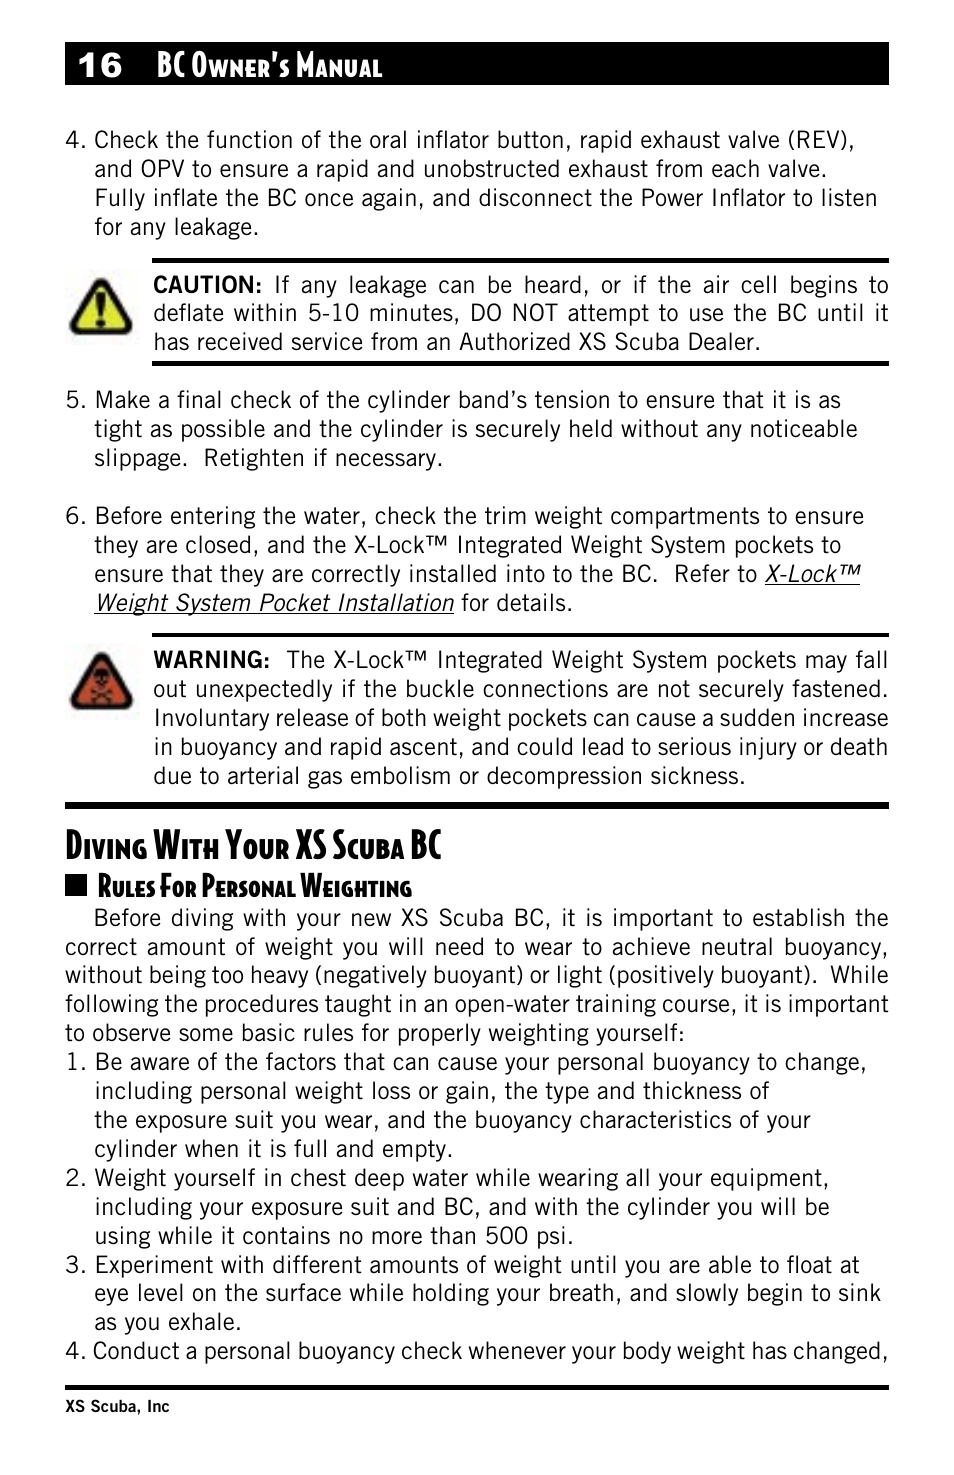 Diving with your xs scuba bc, Rules for personal weighting, 16 bc owner’s manual | XS Scuba Buoyancy Compensator User Manual | Page 16 / 24